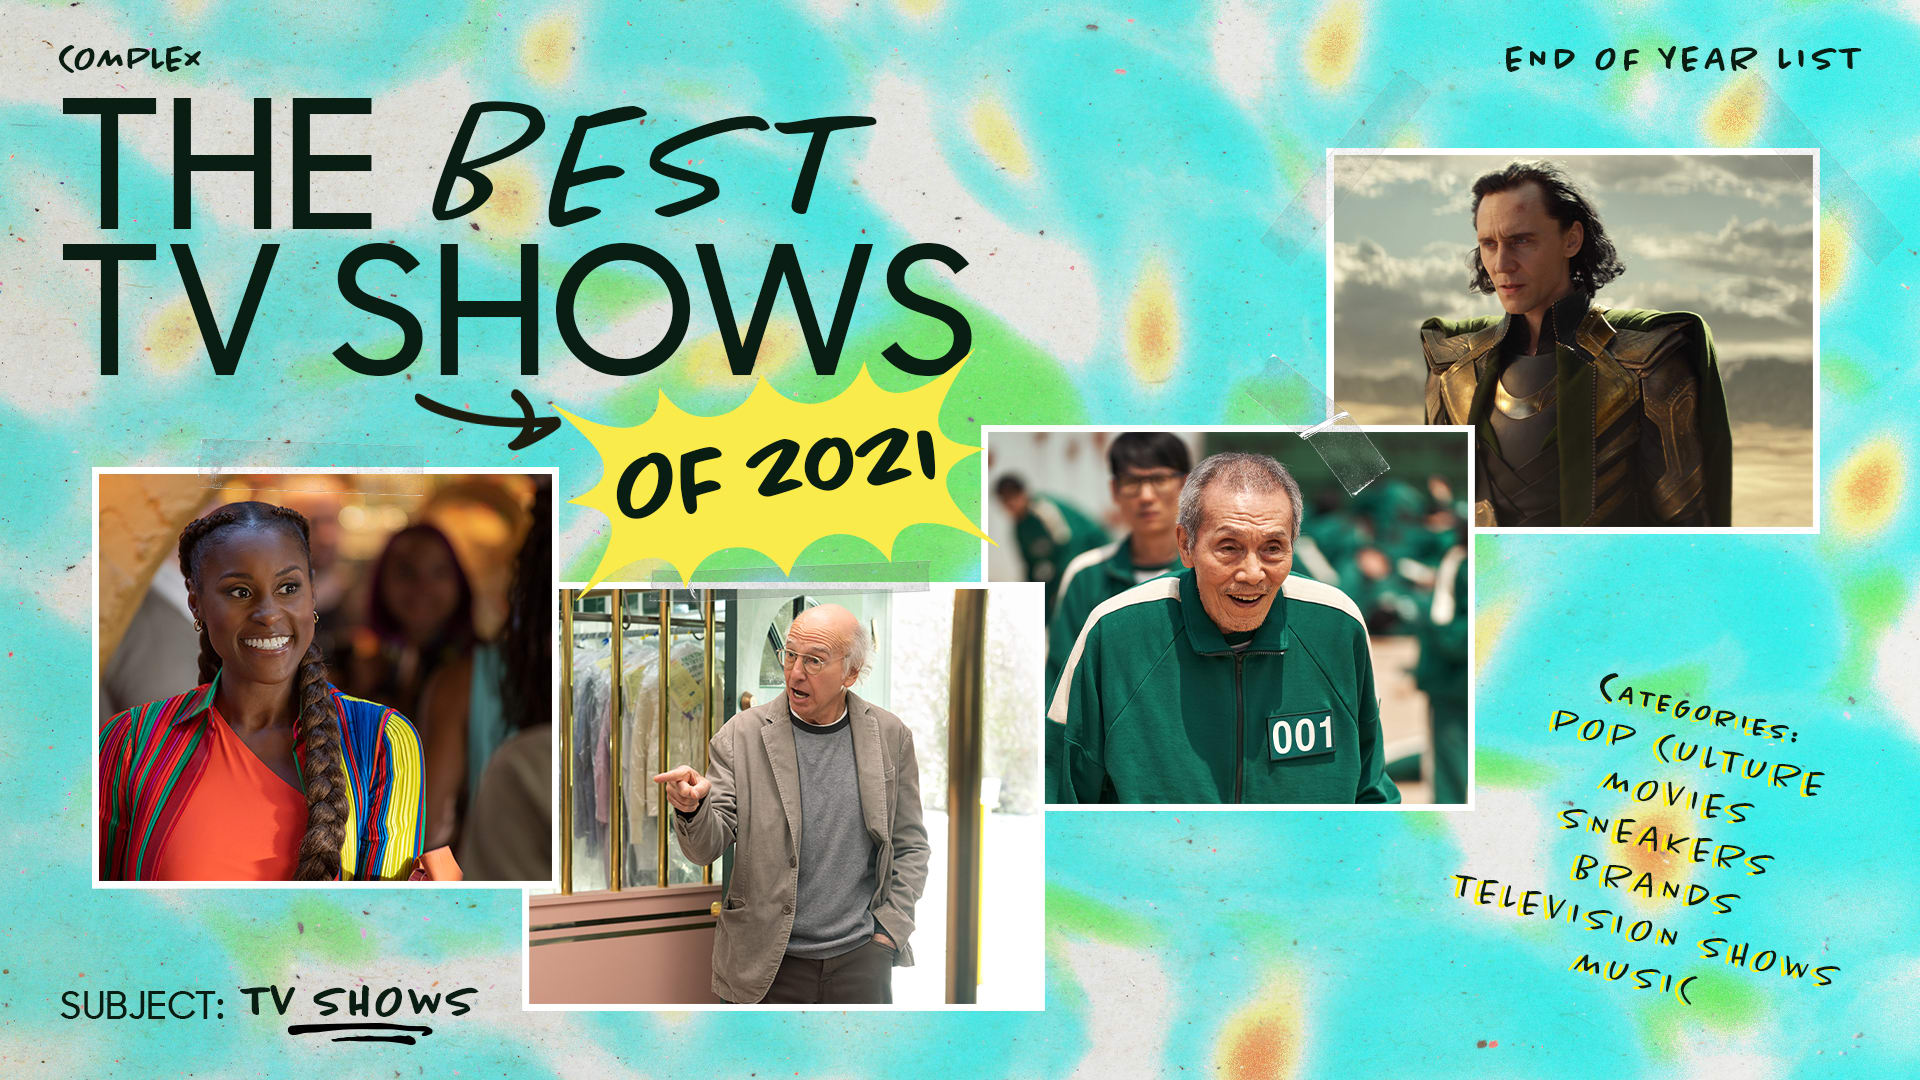 butik tank etik Best TV Shows of 2021: The 15 Top TV Series of The Year | Complex